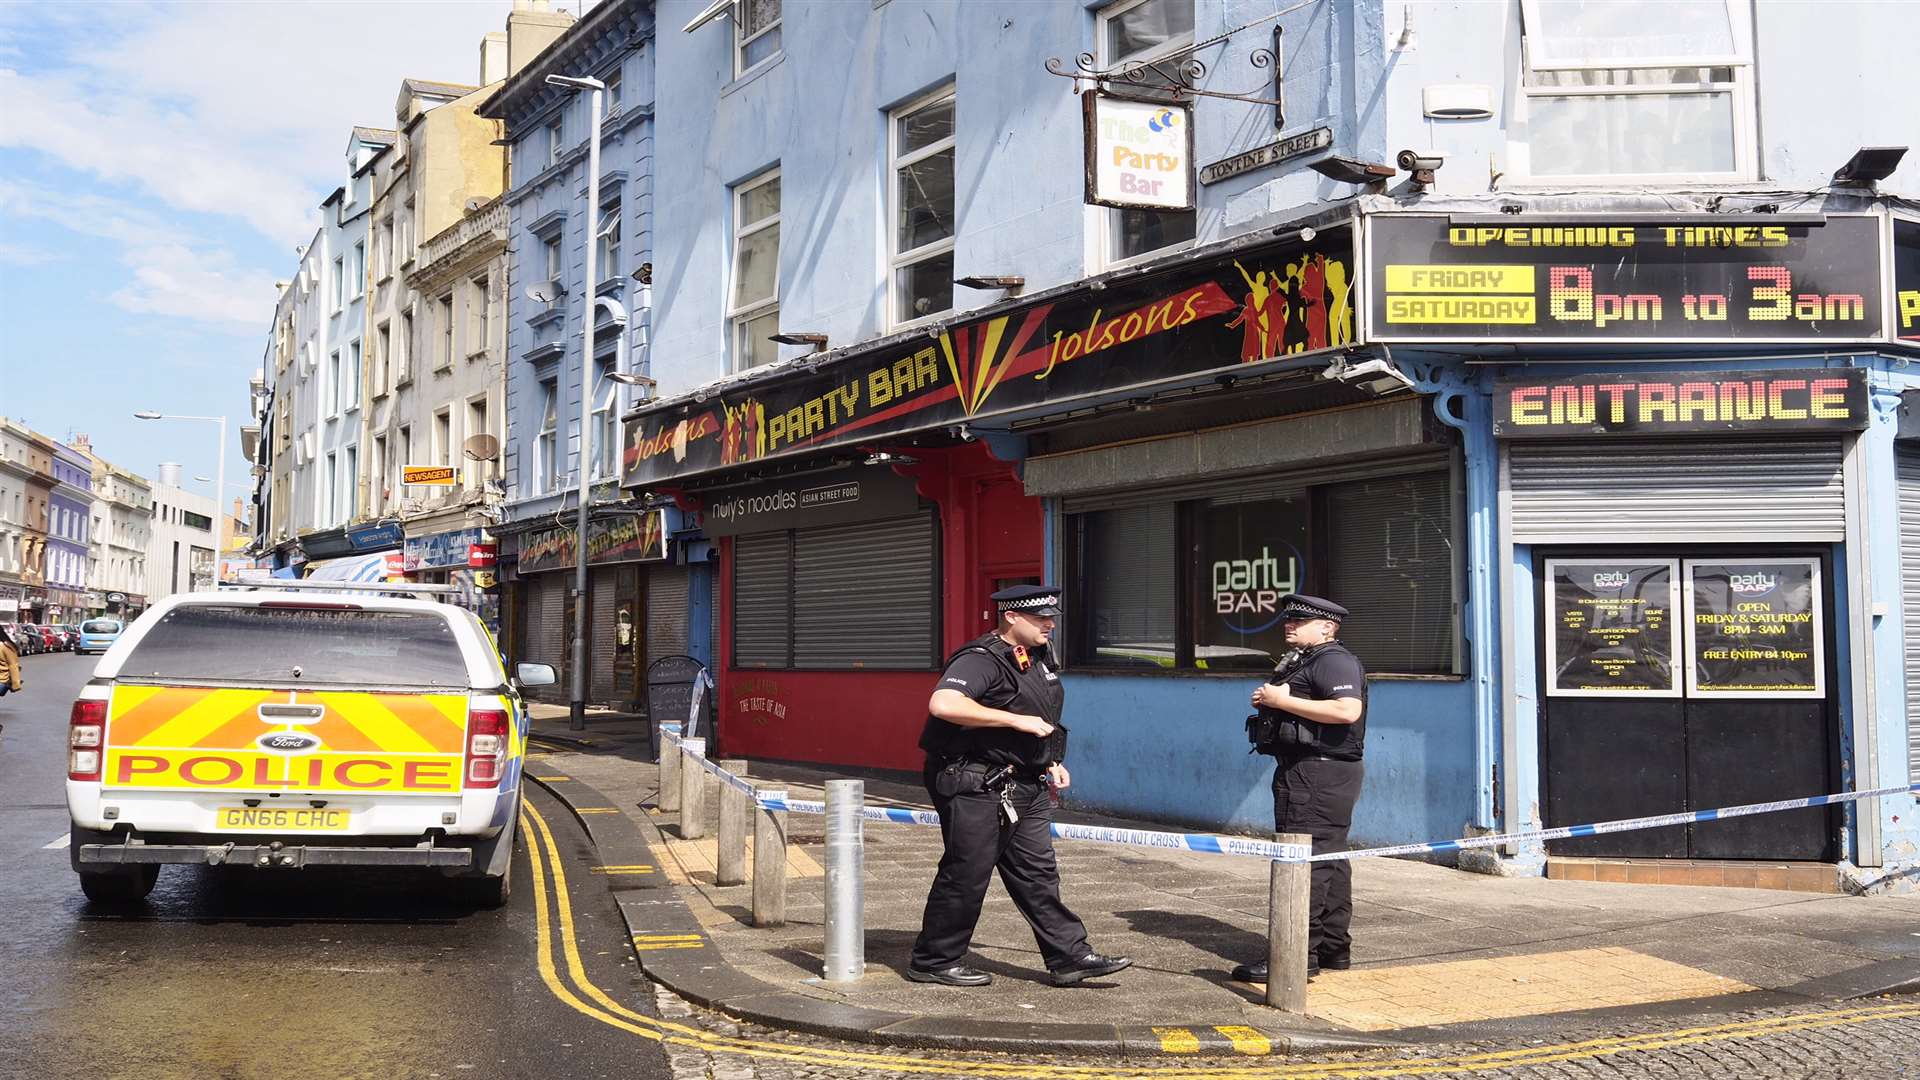 Jolson Party Bar has been taped off. Picture: Andy Payton